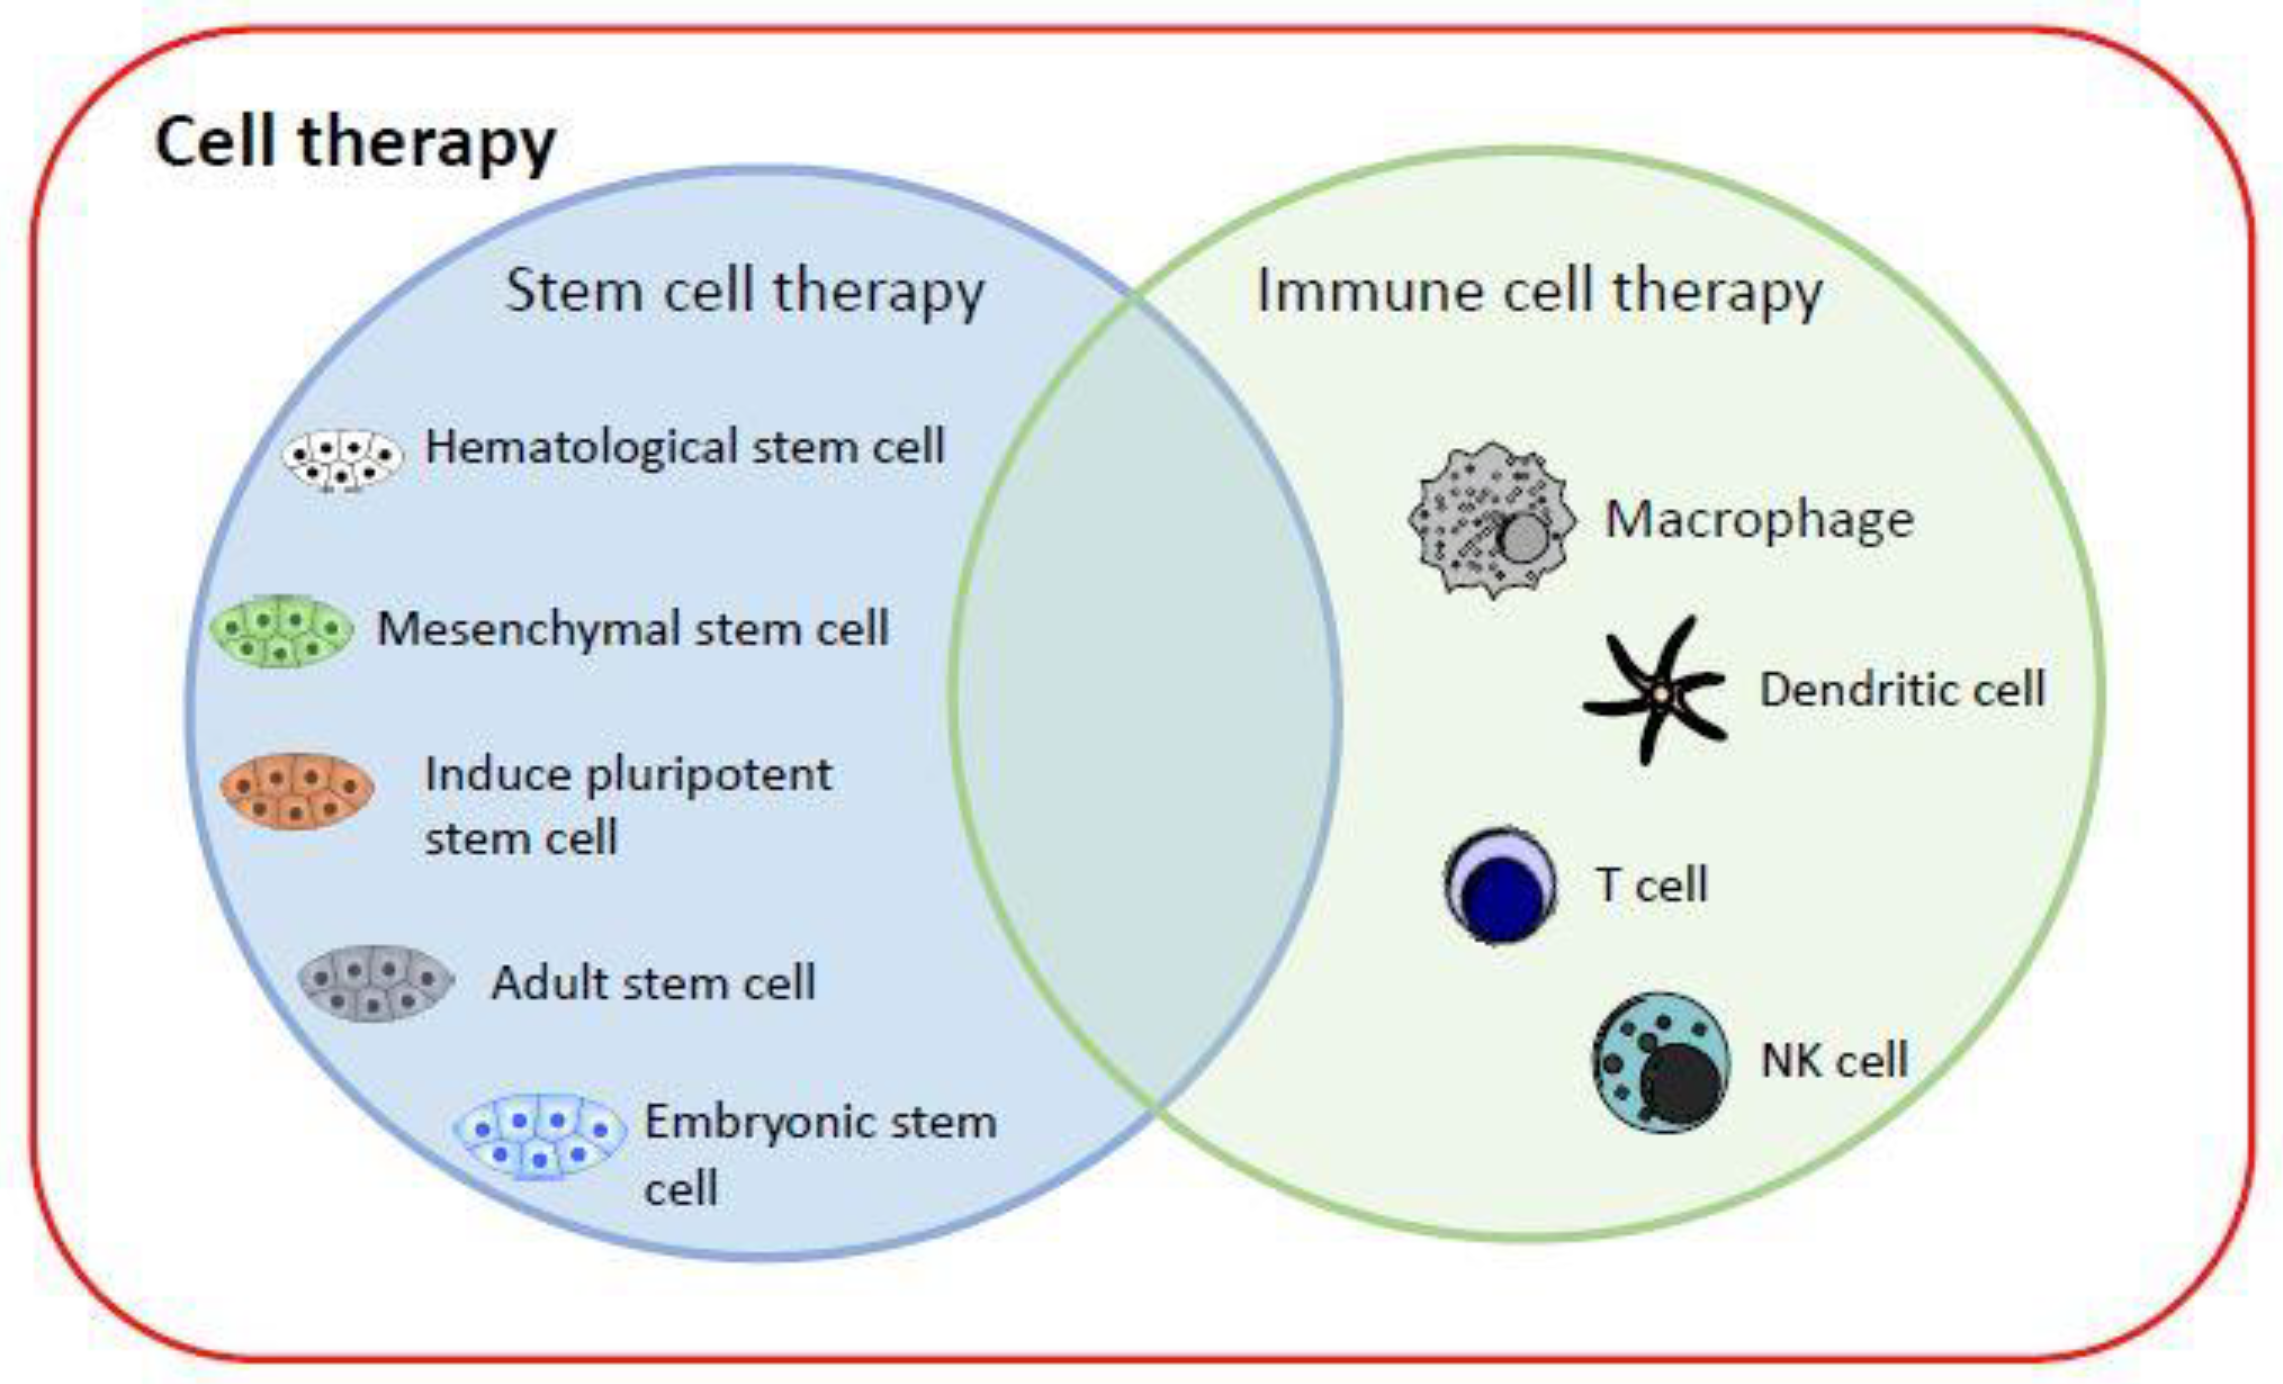 FDA Warns About Stem Cell Therapies - FDA